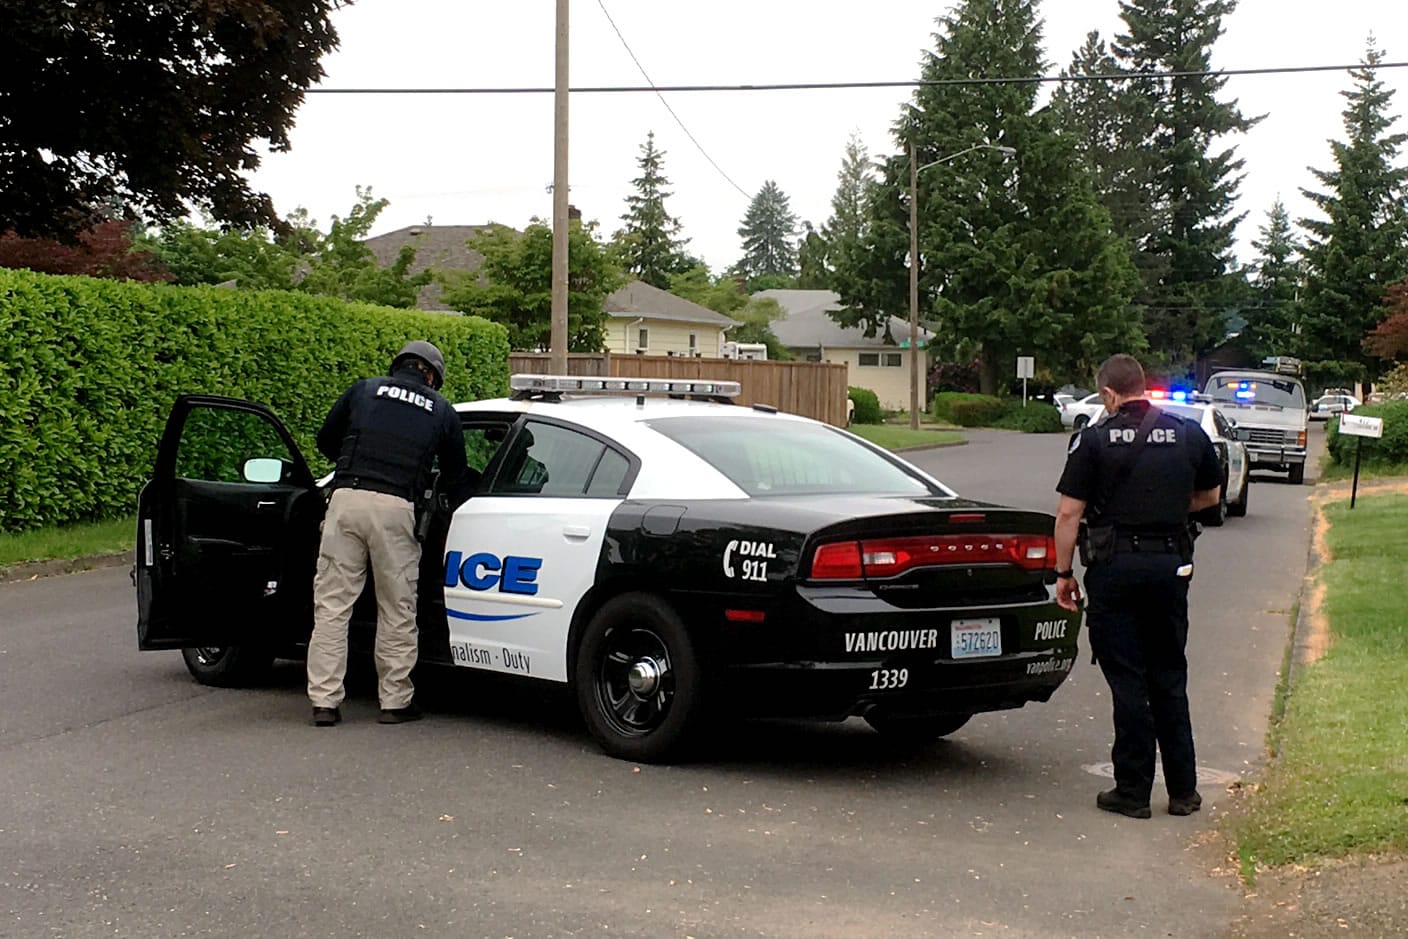 Police investigate a shooting in Vancouver on Monday afternoon. One suspect was taken into custody by police.